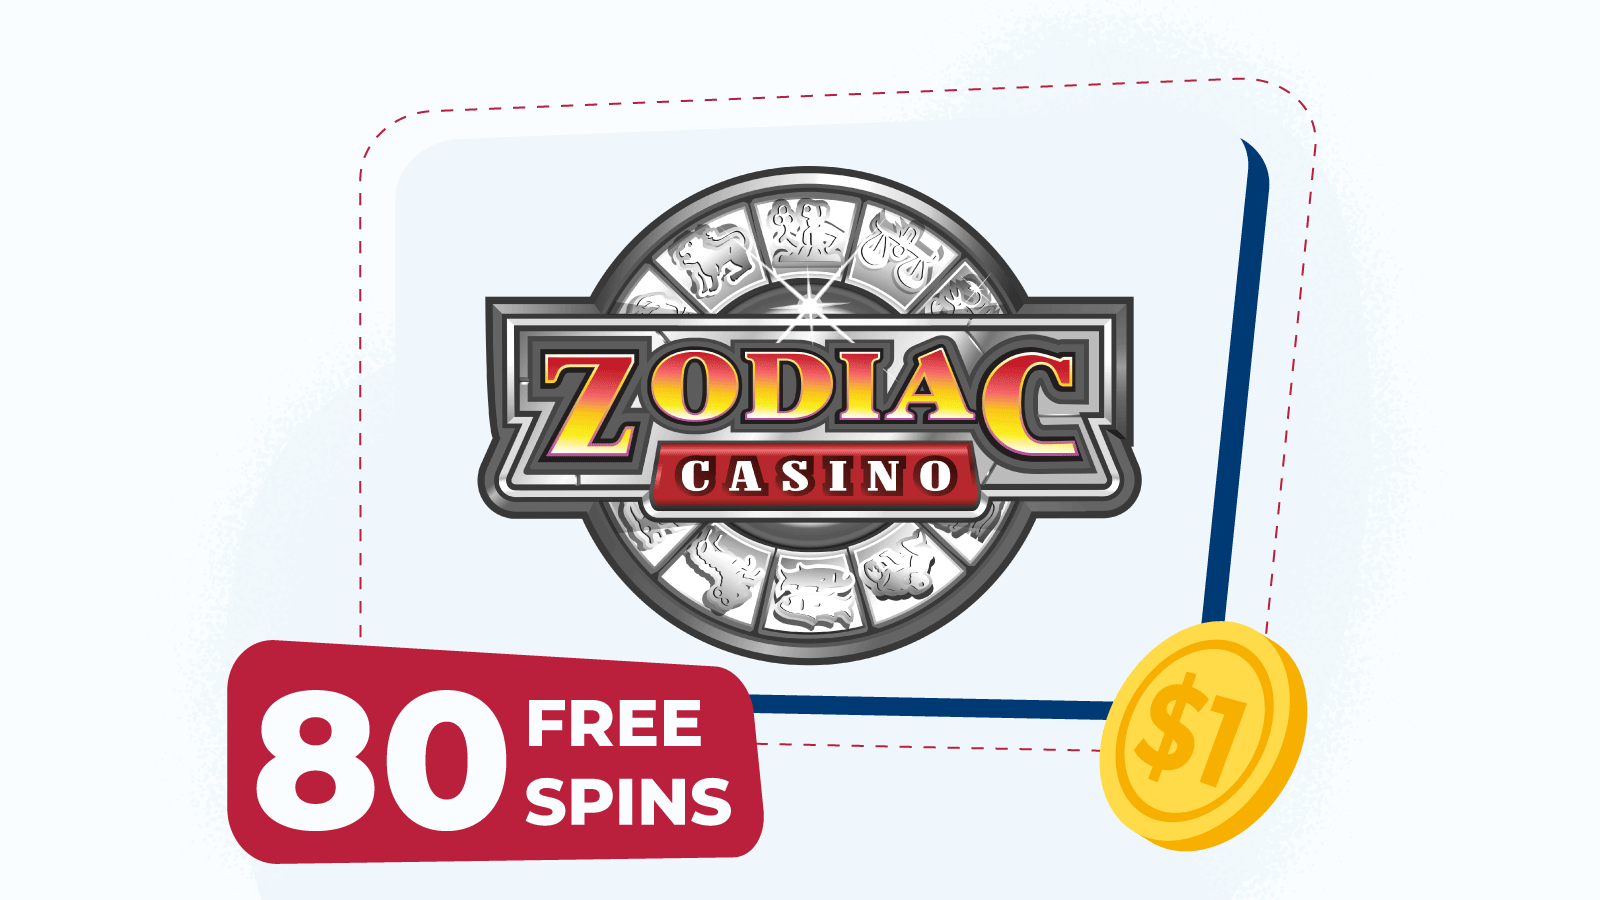 80 free spins for $1 at Zodiac Casino Rewards